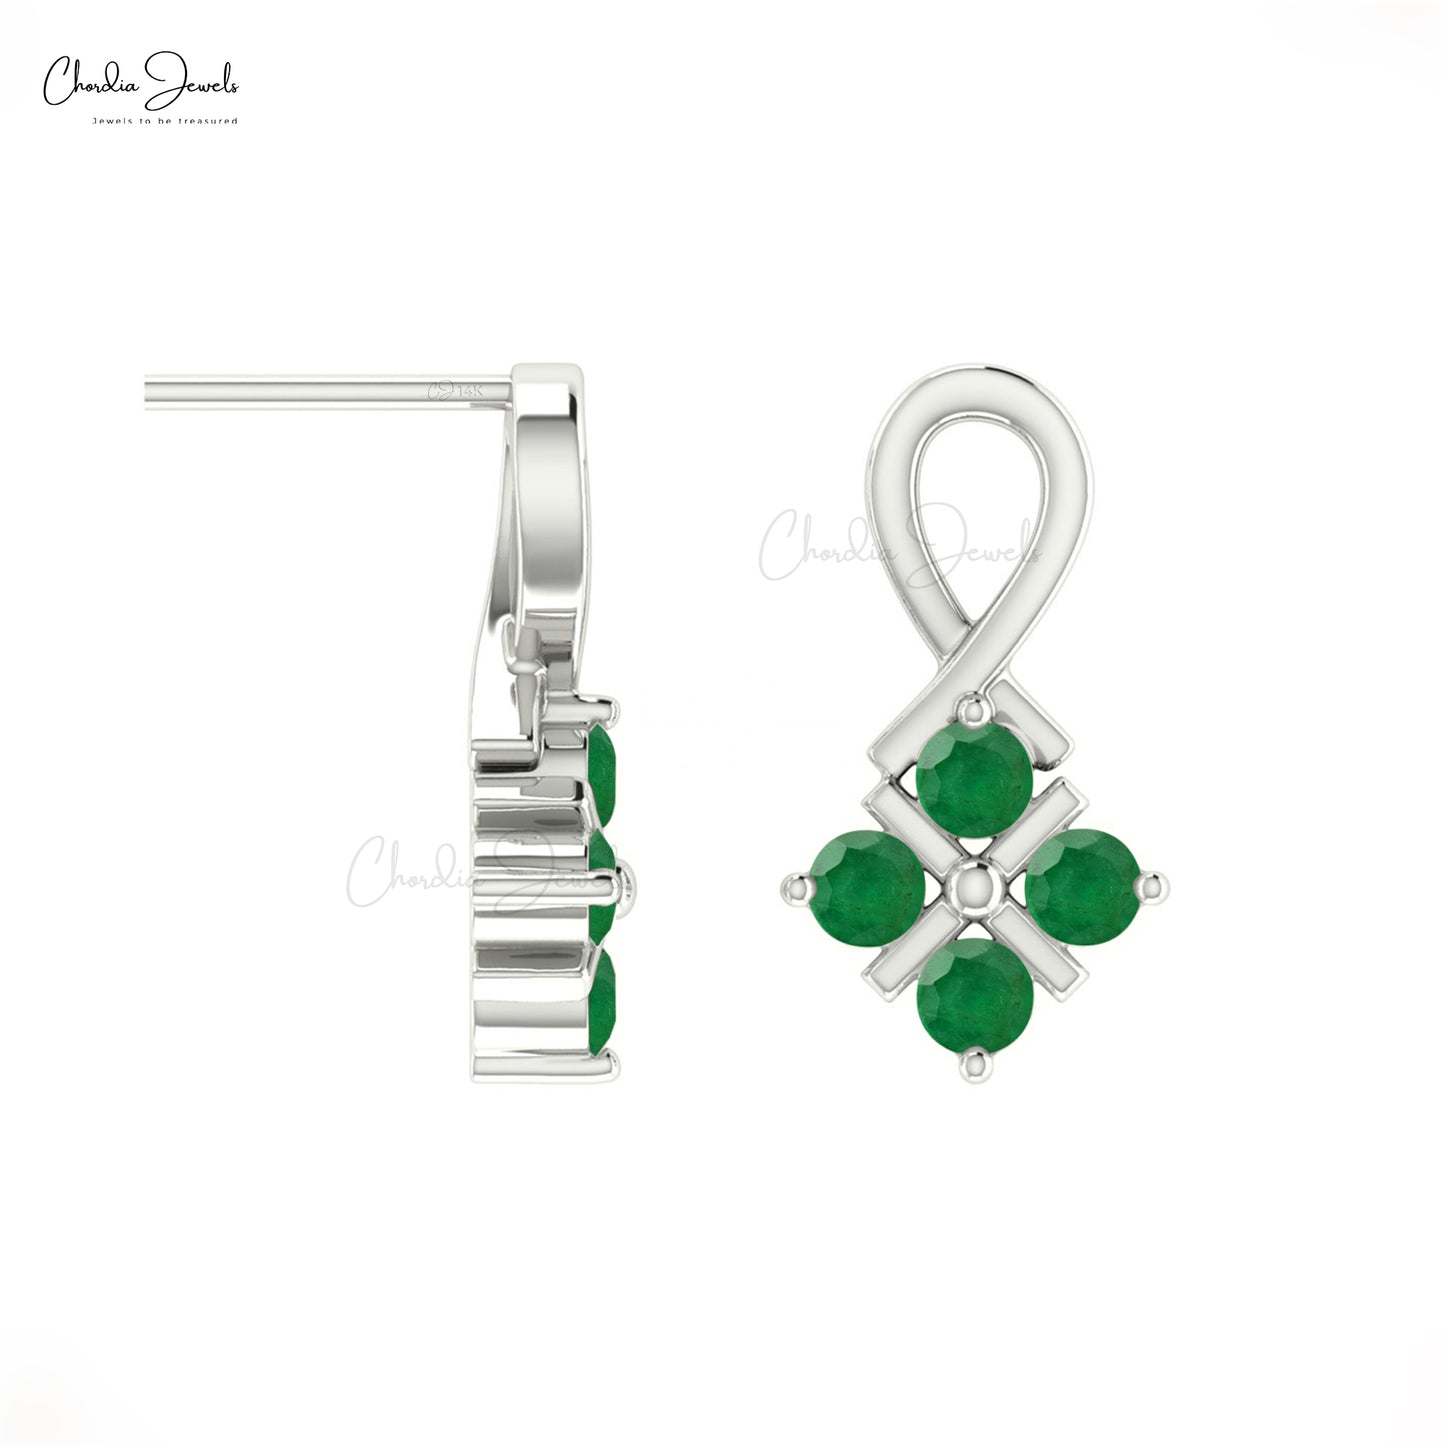 Complete your overall look with our emerald twisted earrings.